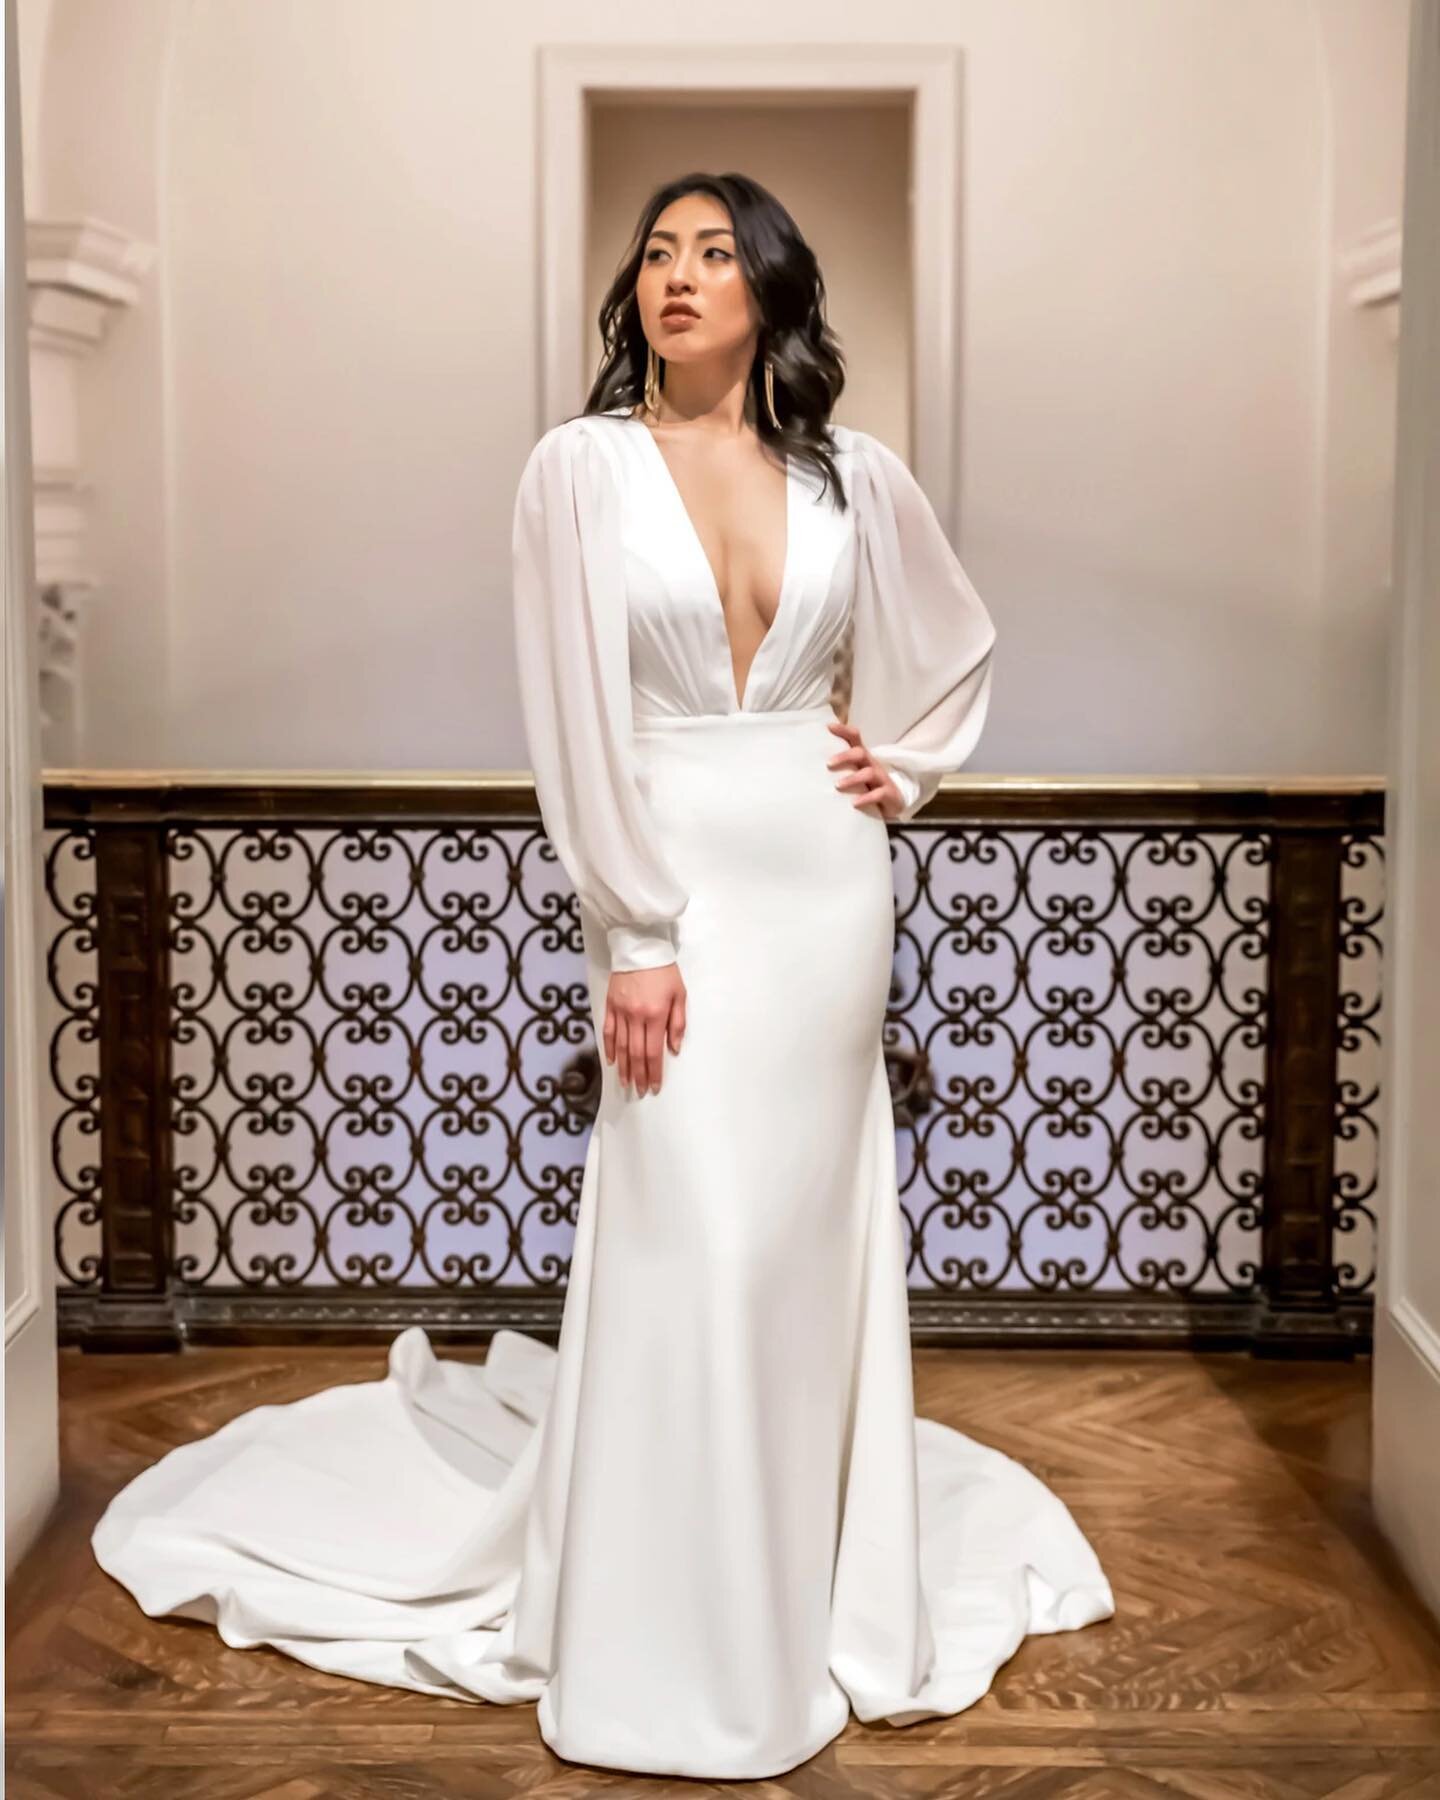 she&rsquo;s bold &amp; she&rsquo;s classy - meet G W E N ✨ #colbyjohncanvas 

#newdress #longsleeveweddingdress #uniqueweddingdress #fittedweddingdress #indybridalboutique #colbyjohnbridalcouture